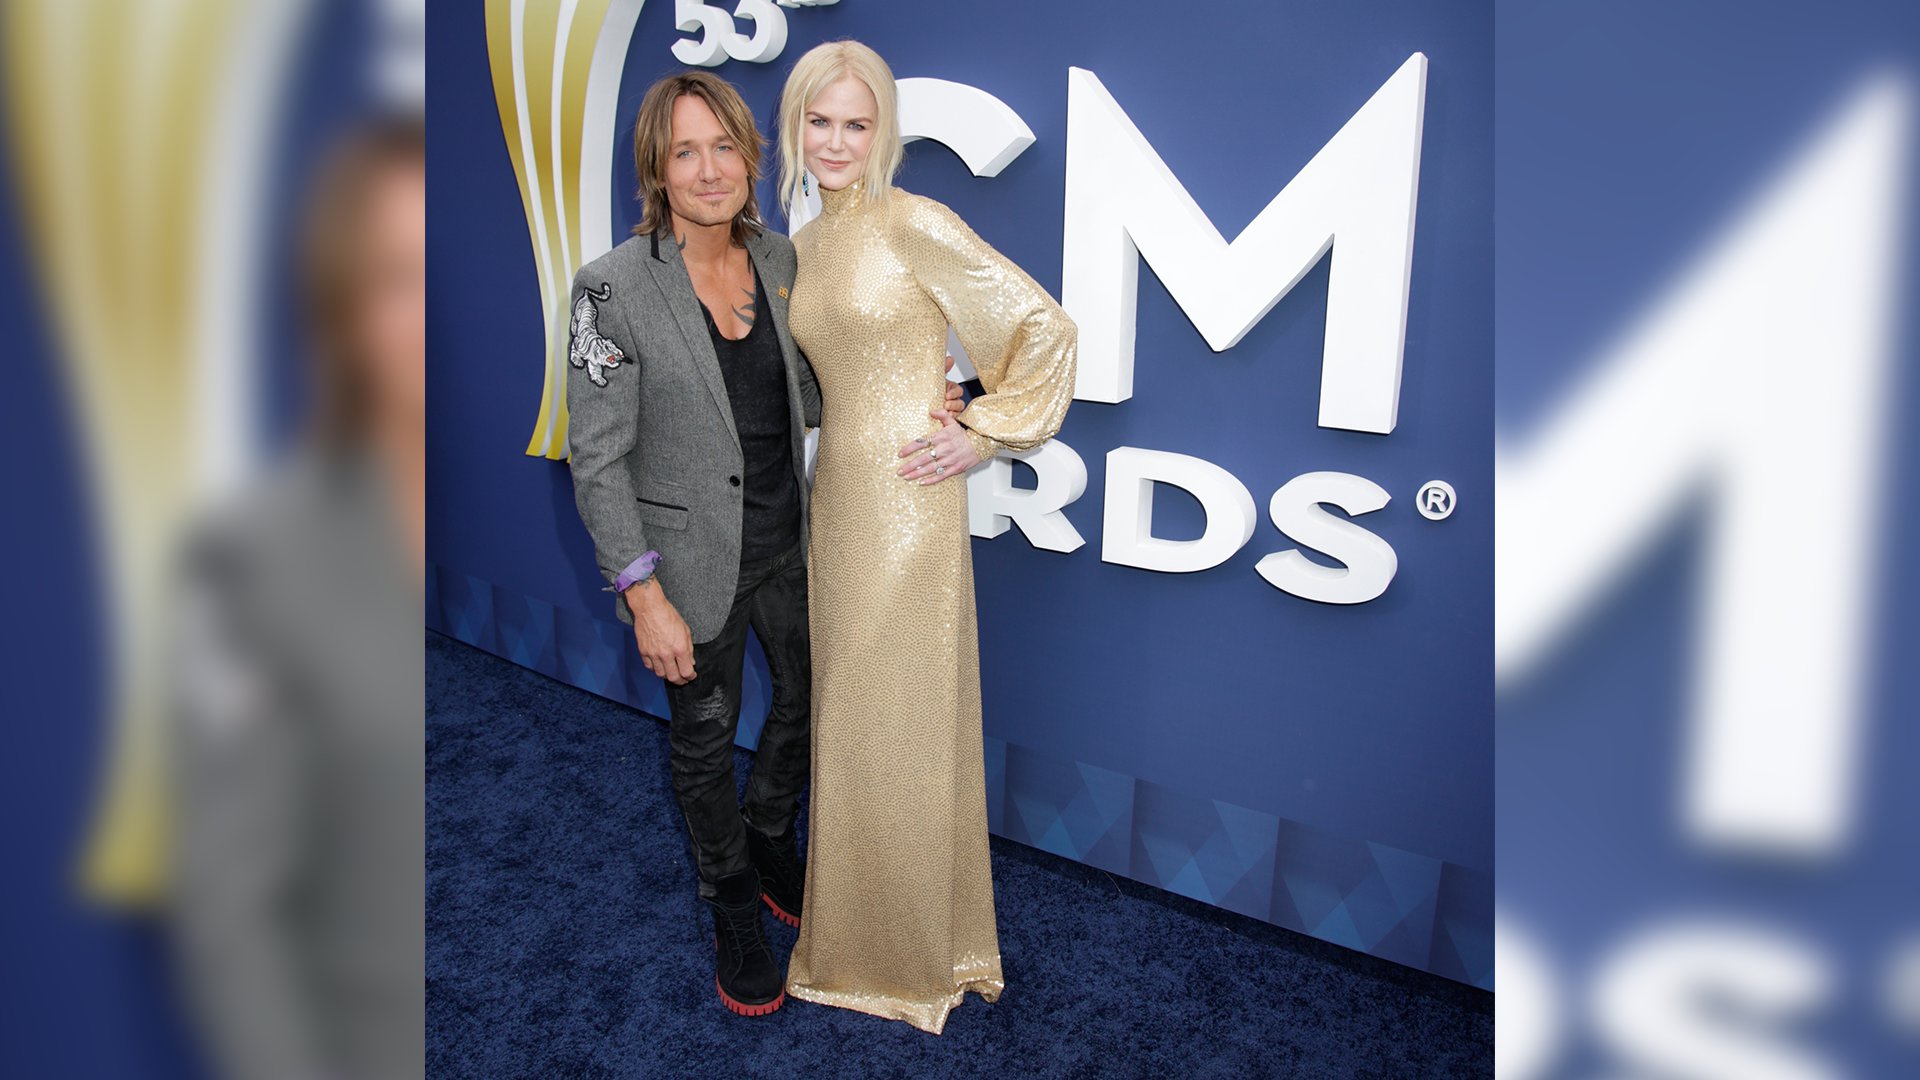 Keith Urban poses with wife Nicole Kidman, who looks statuesque in a floor-length gold gown.